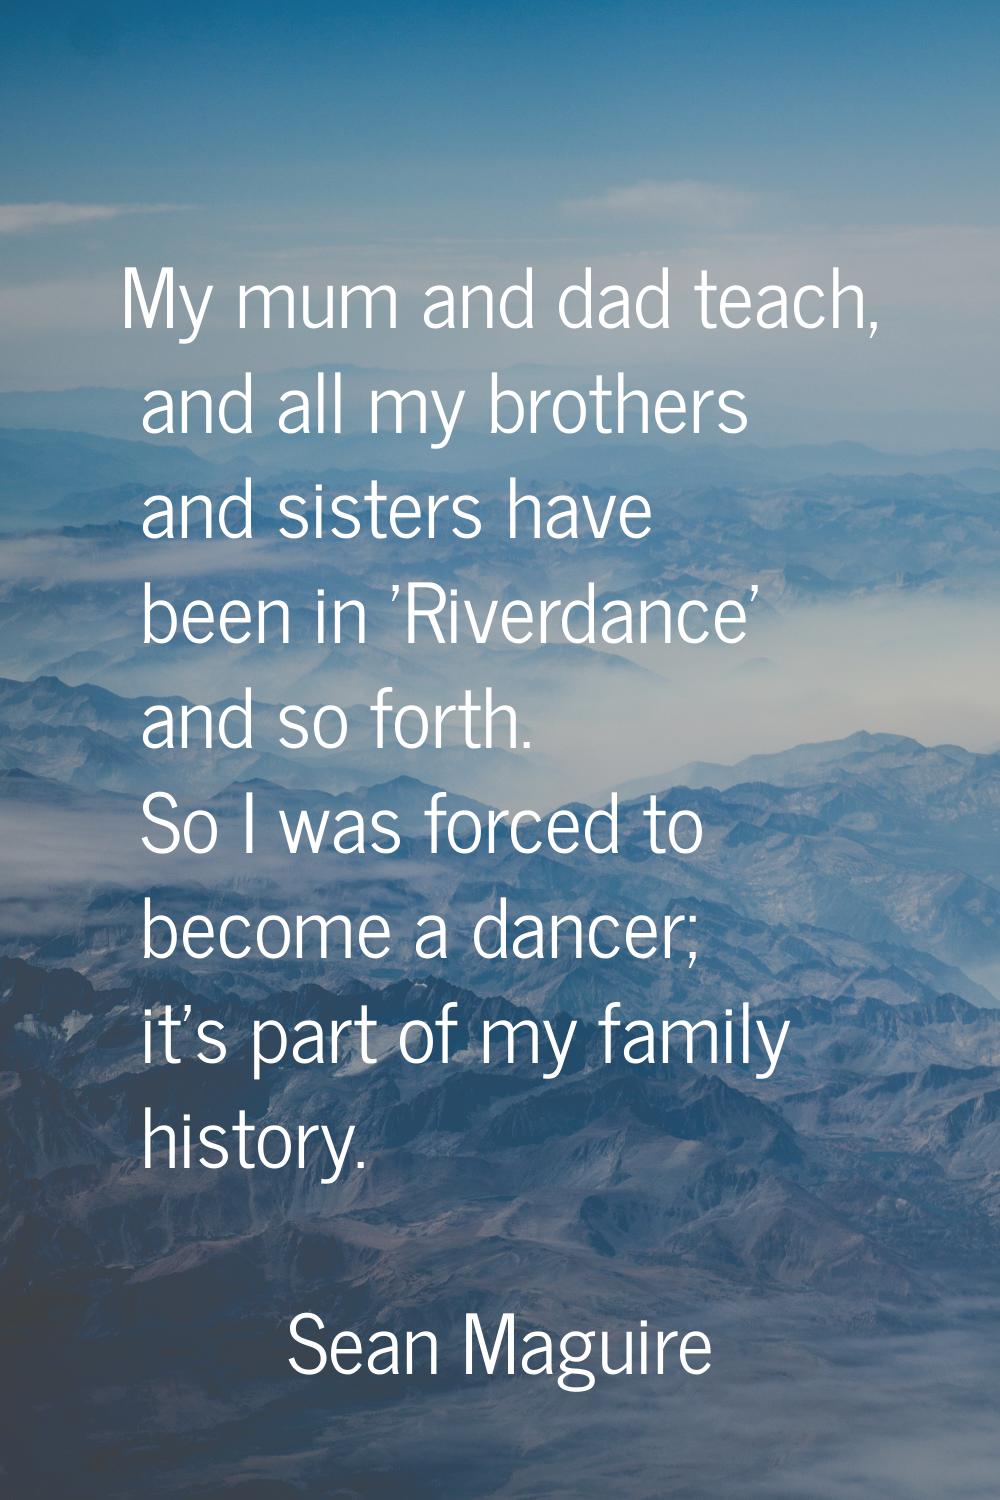 My mum and dad teach, and all my brothers and sisters have been in 'Riverdance' and so forth. So I 